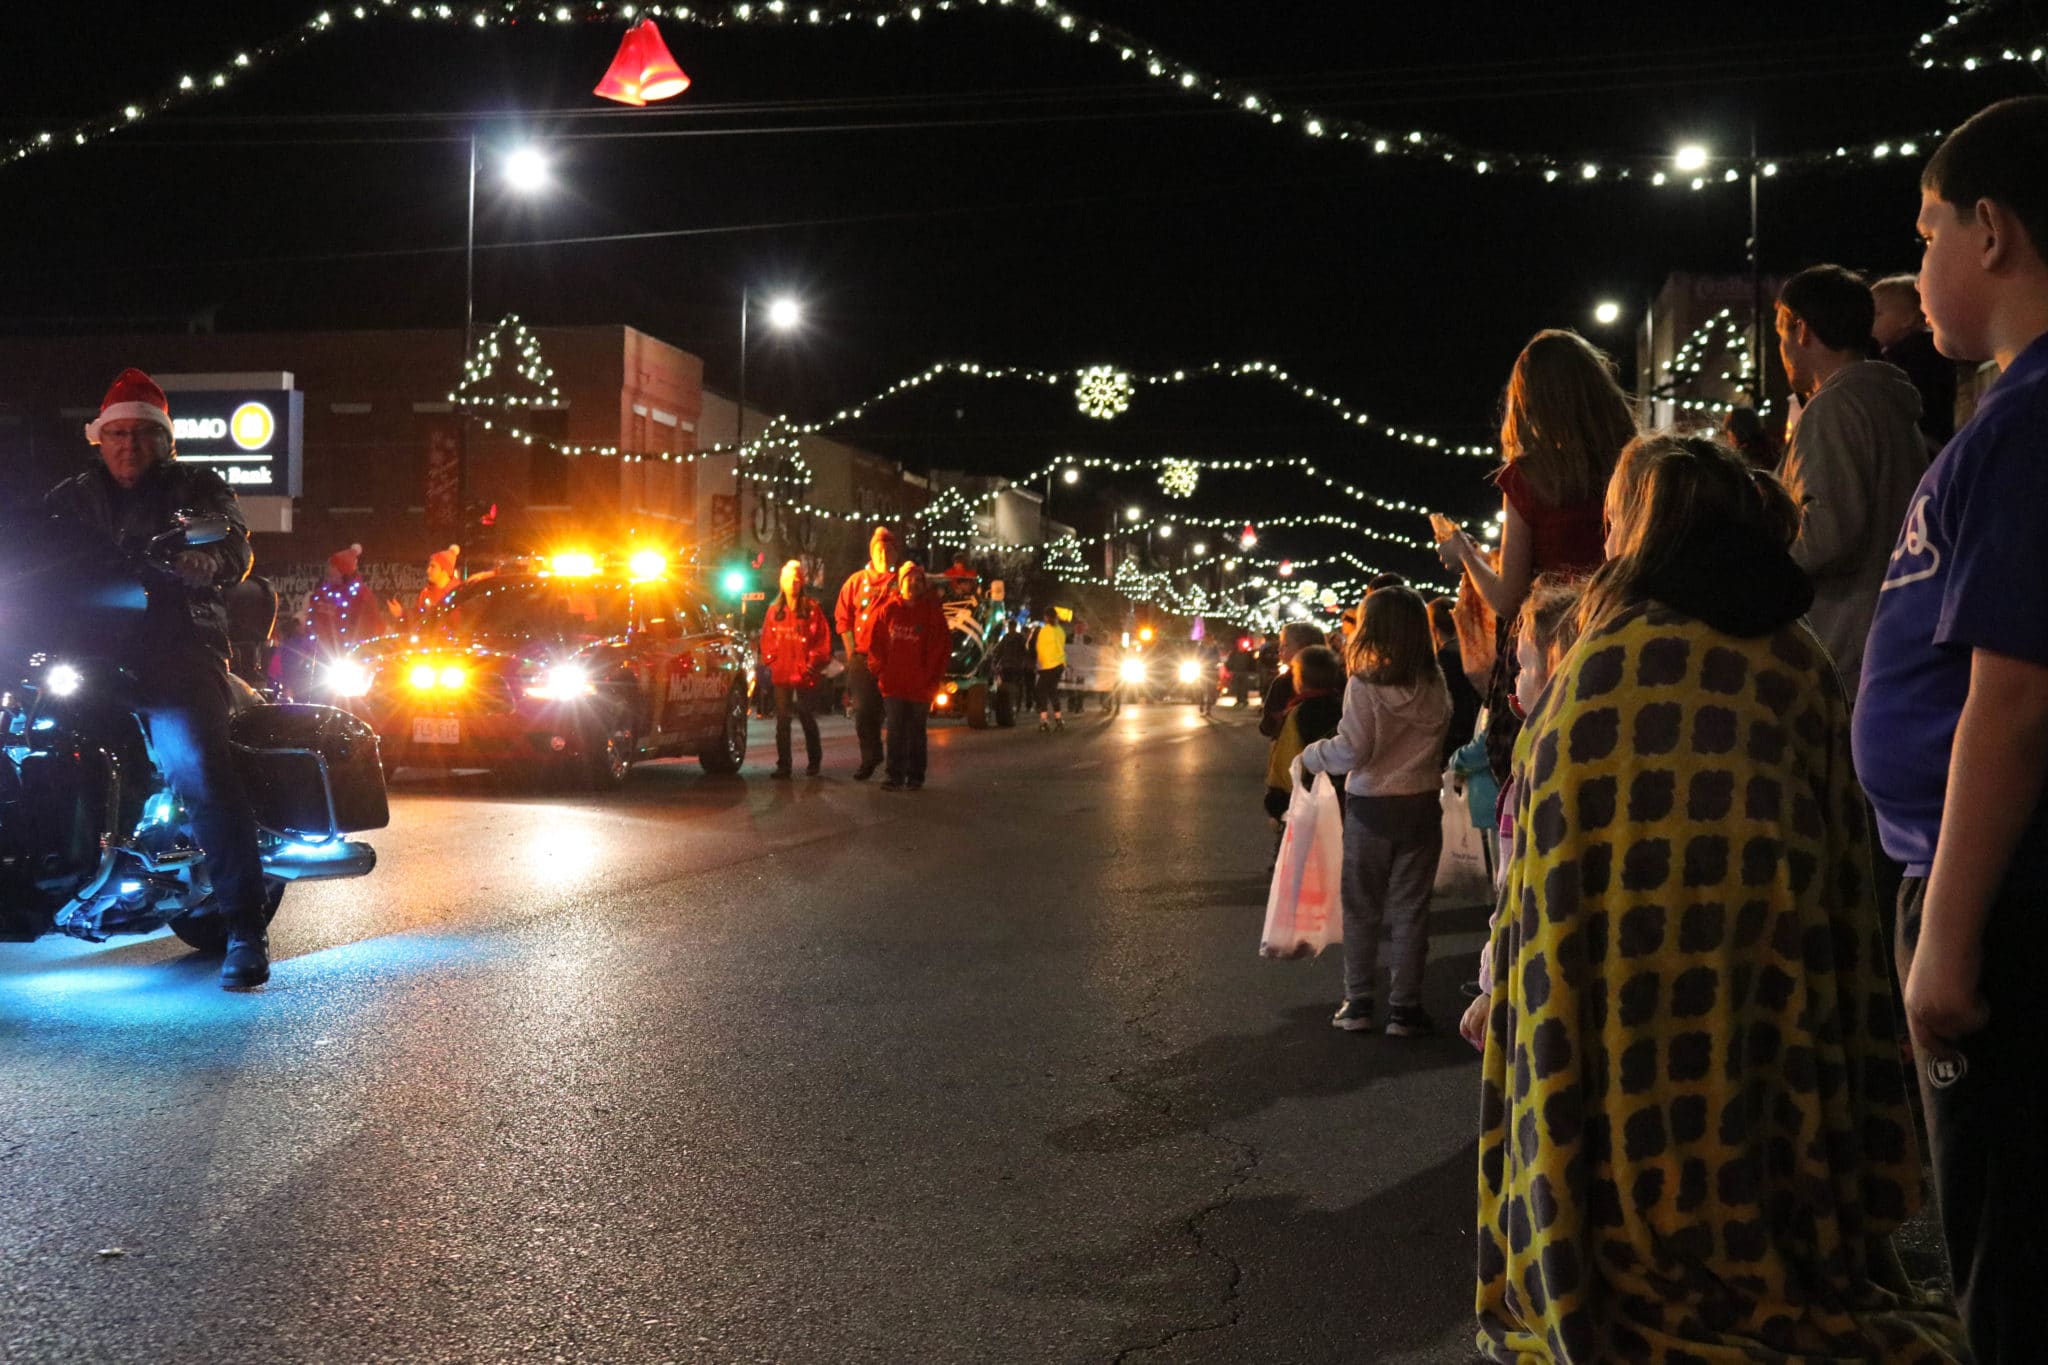 Annual Pittsburg Christmas Parade – Call for Entries